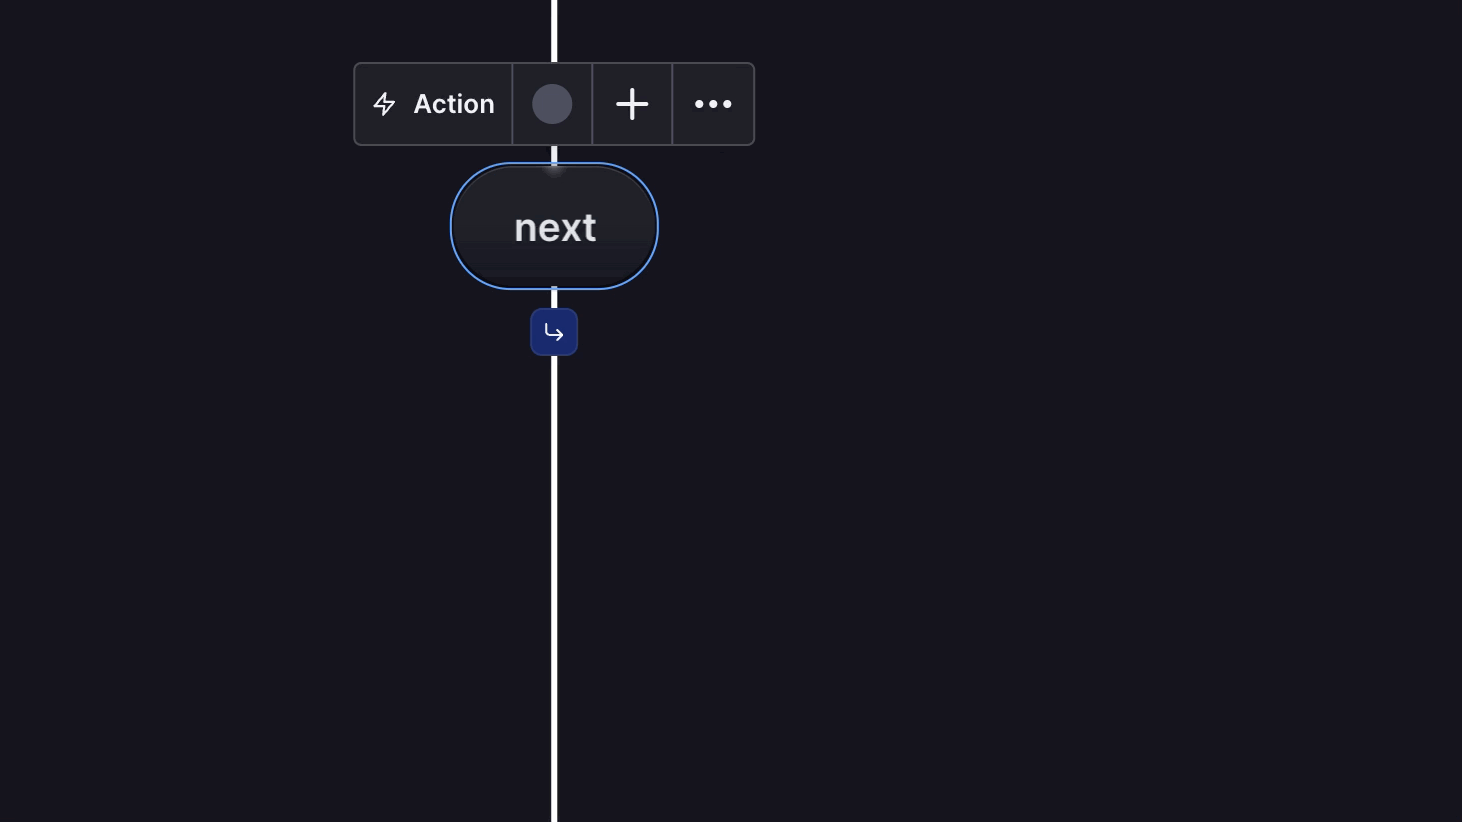 A selected transition with the next label. Using the arrow icon button adds a new transition from the same source state. The first transition is then labeled 1 next IF new guard. The second transition is labeled 2 next ELSE.